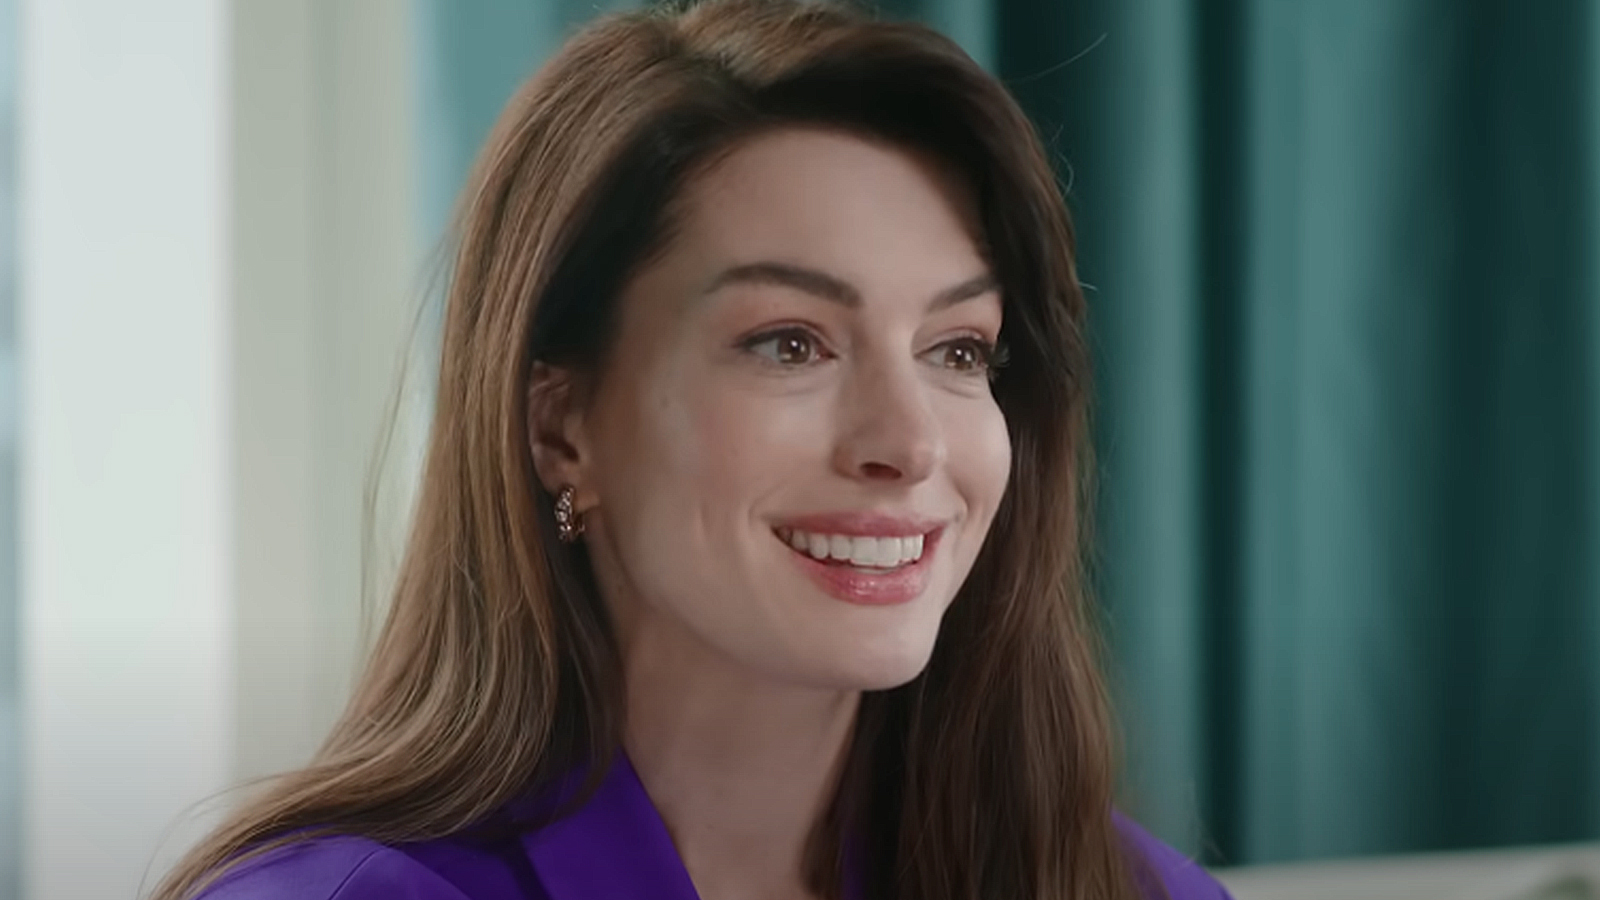 TikTok responds after Anne Hathaway stuns fans with first video